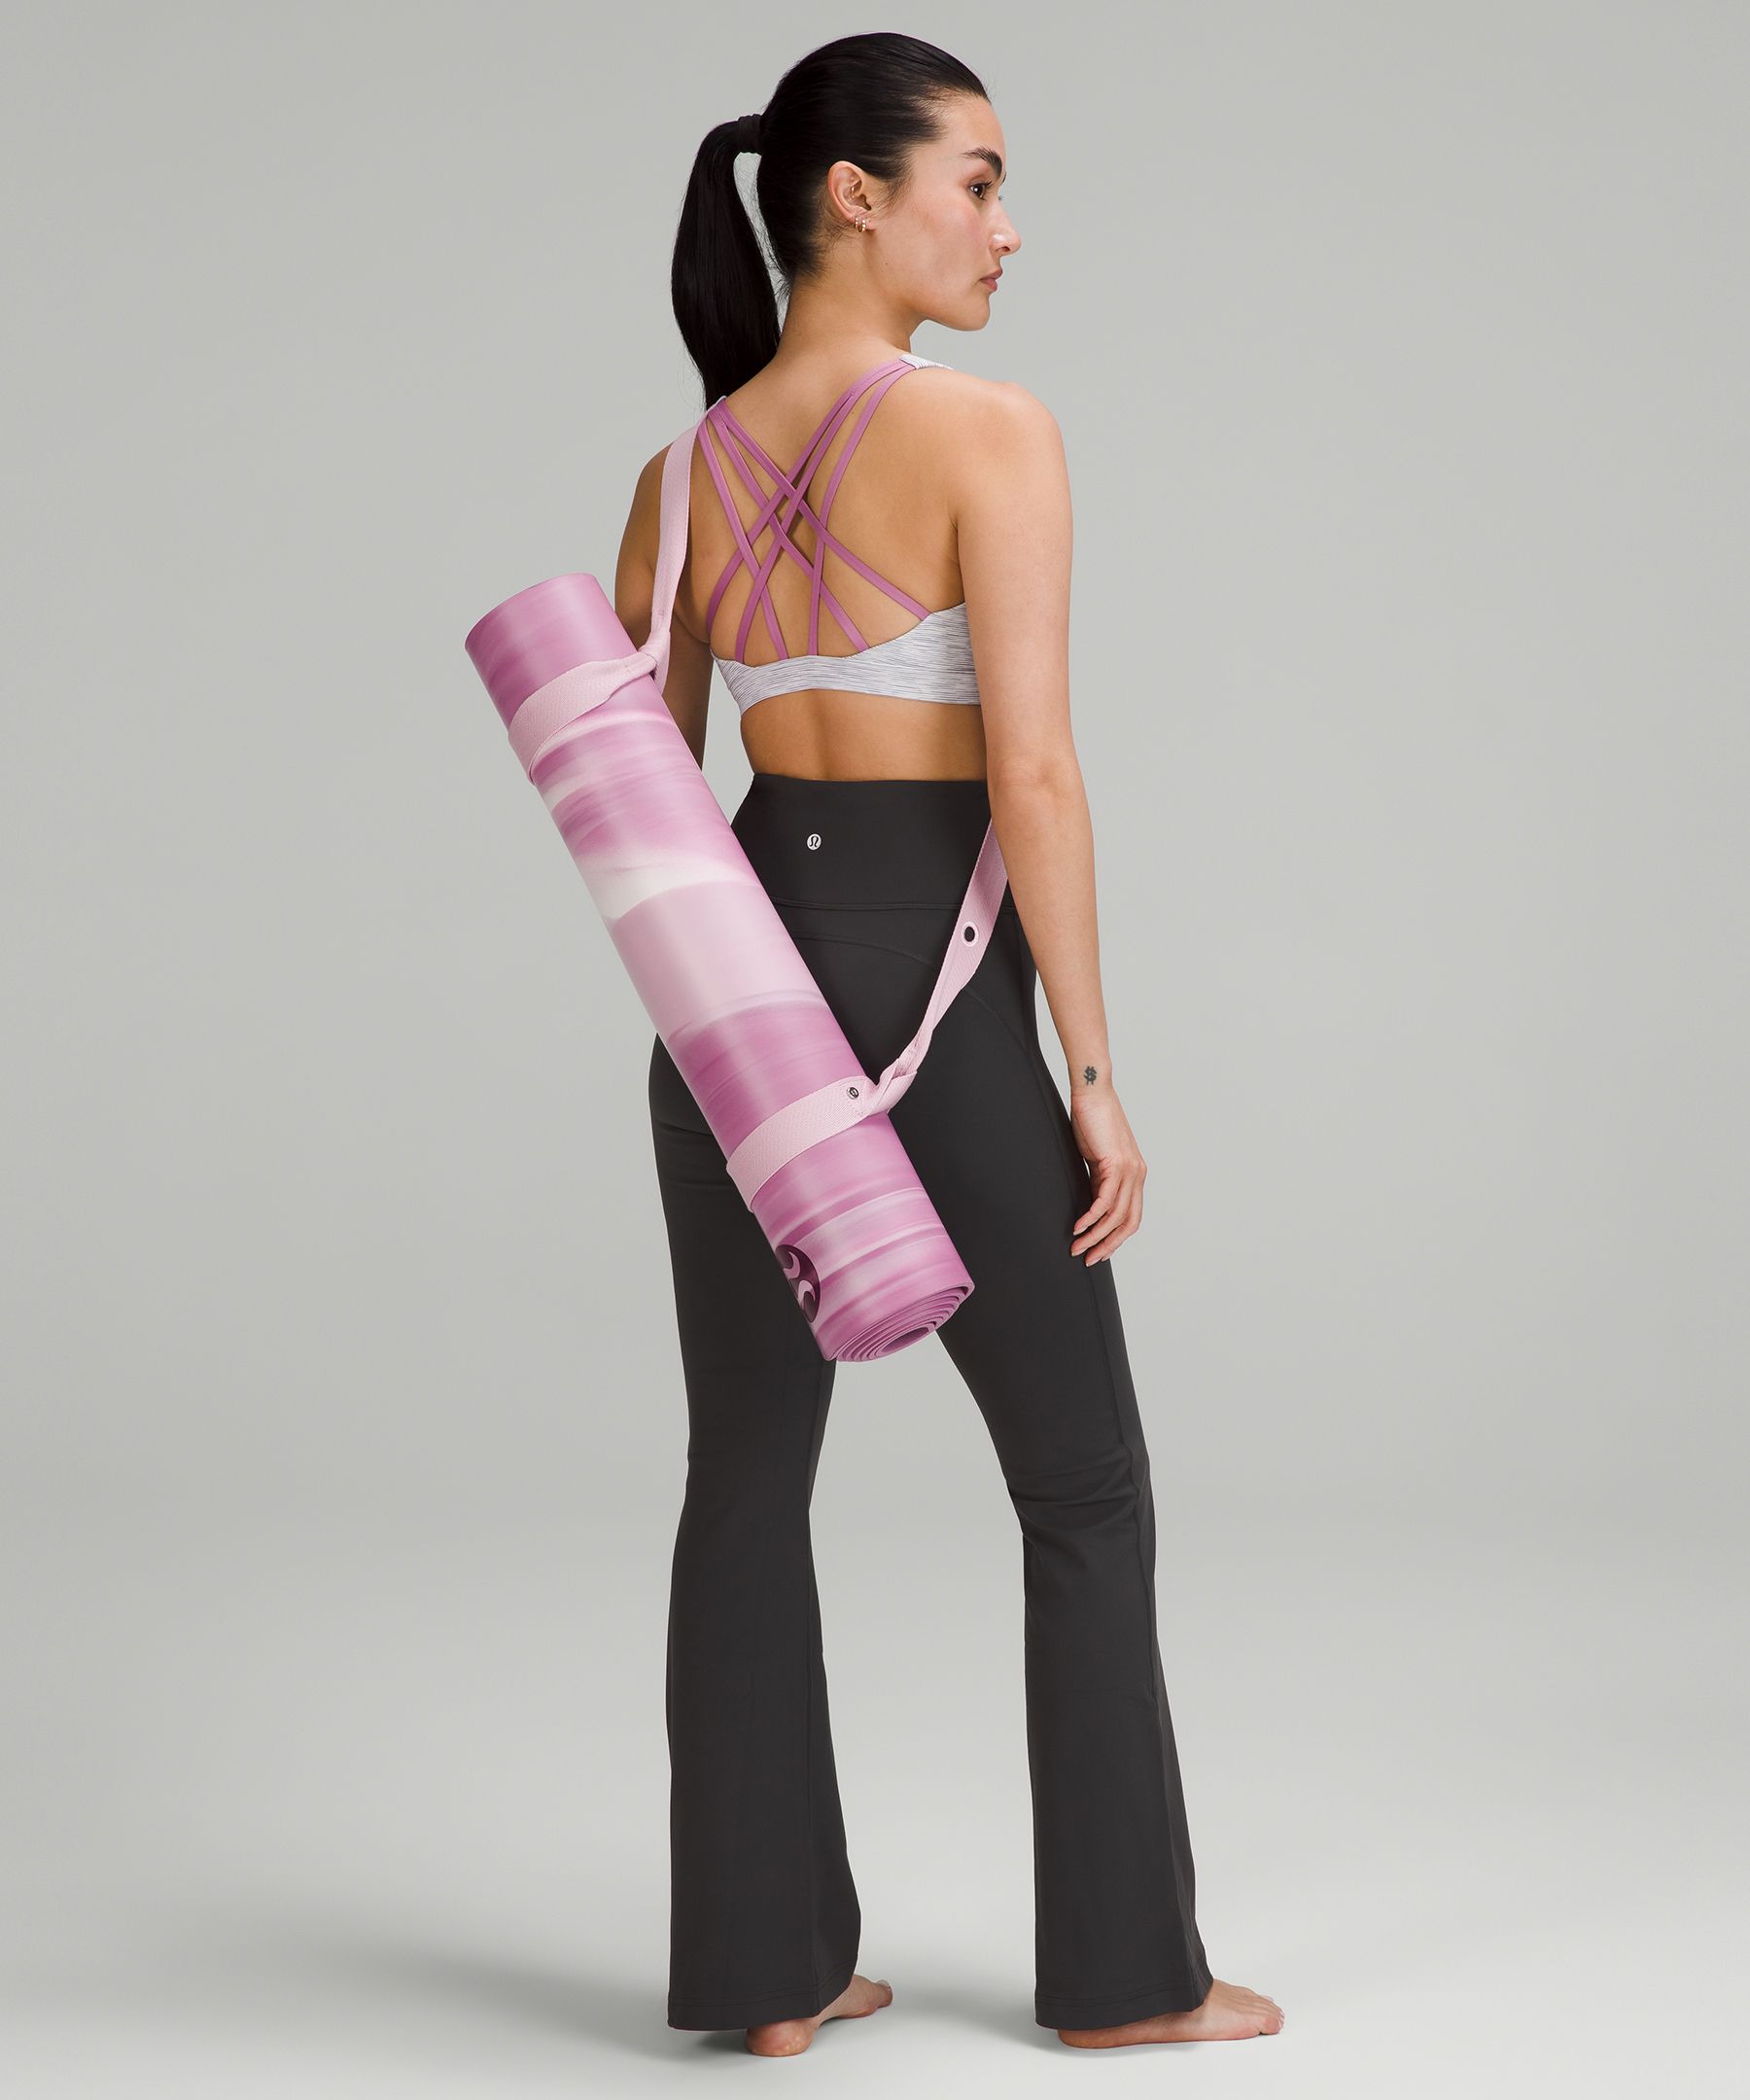 Buy LoopyPull Cotton Yoga Stretching Strap @ 9.95$ as low as